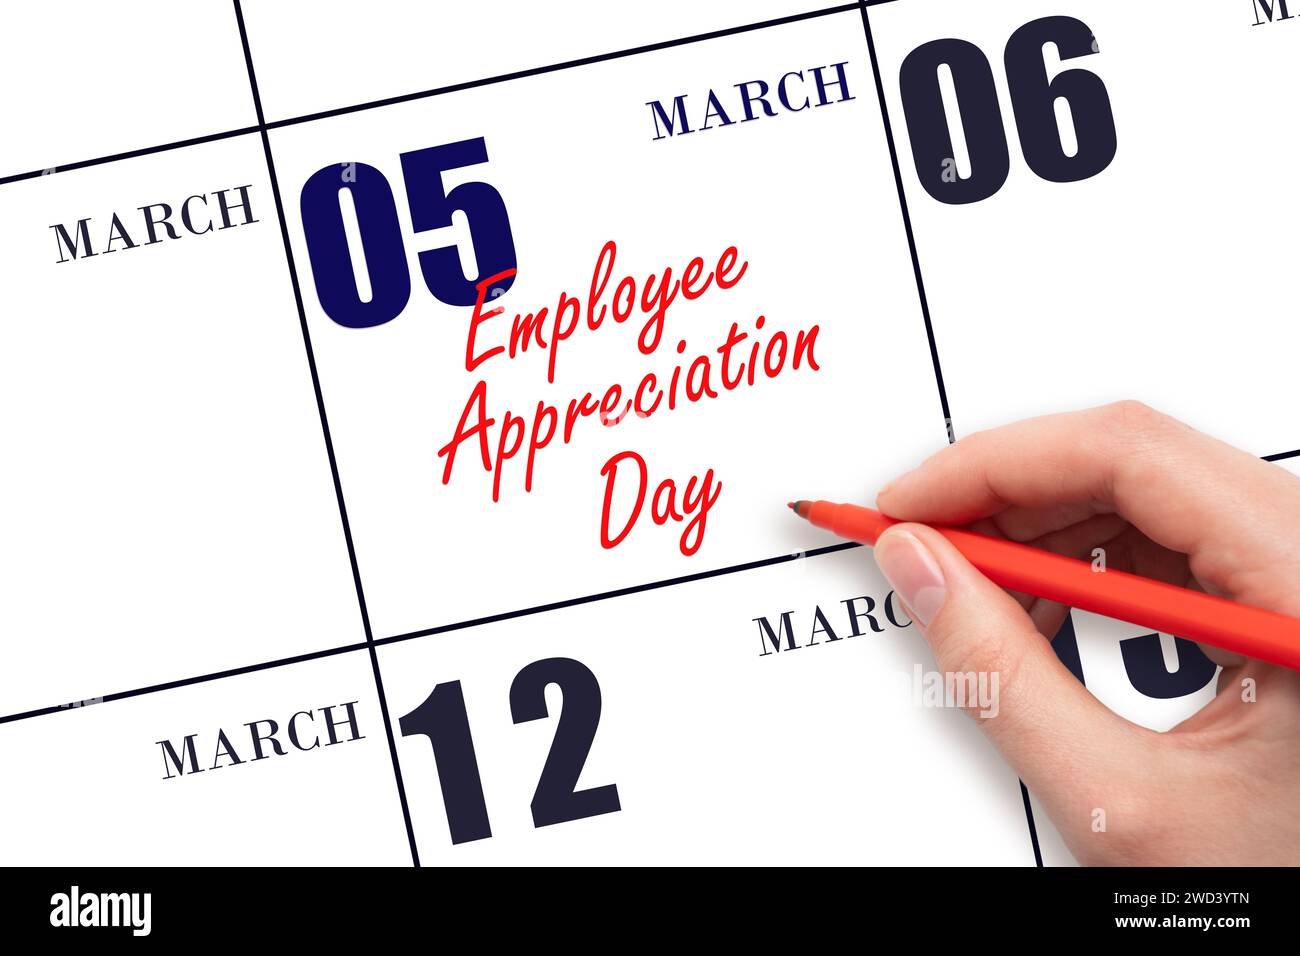 March 5. Hand writing text Employee Appreciation Day  on calendar date. Save the date. Holiday.  Day of the year concept. Stock Photo